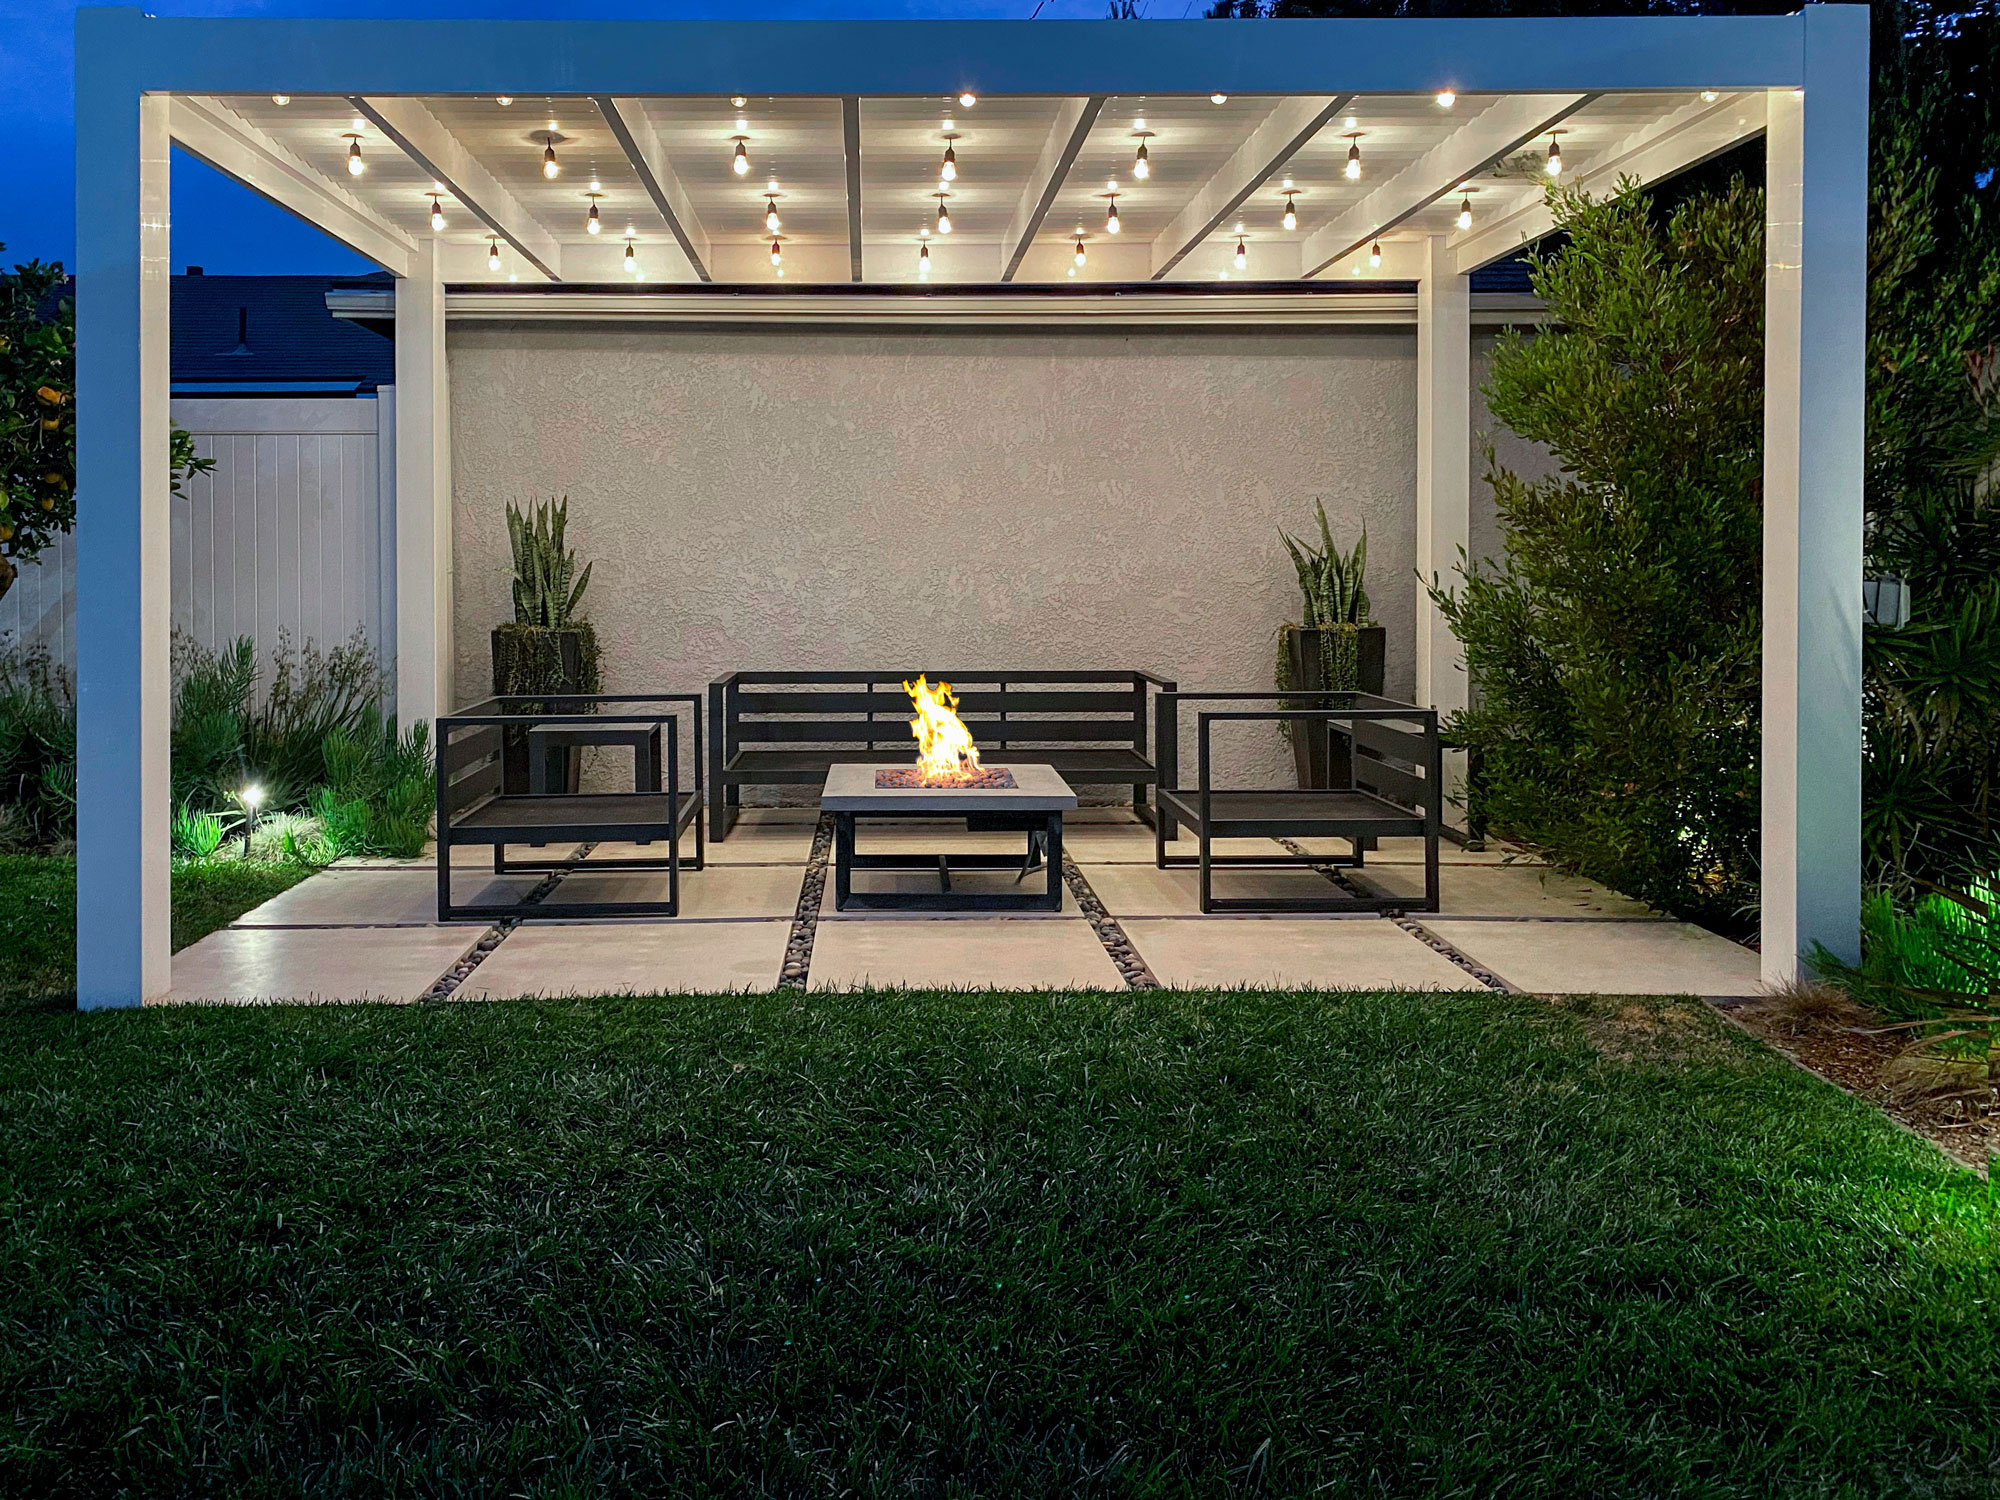 White modern pergola with cantina bistro lights and firepit at night